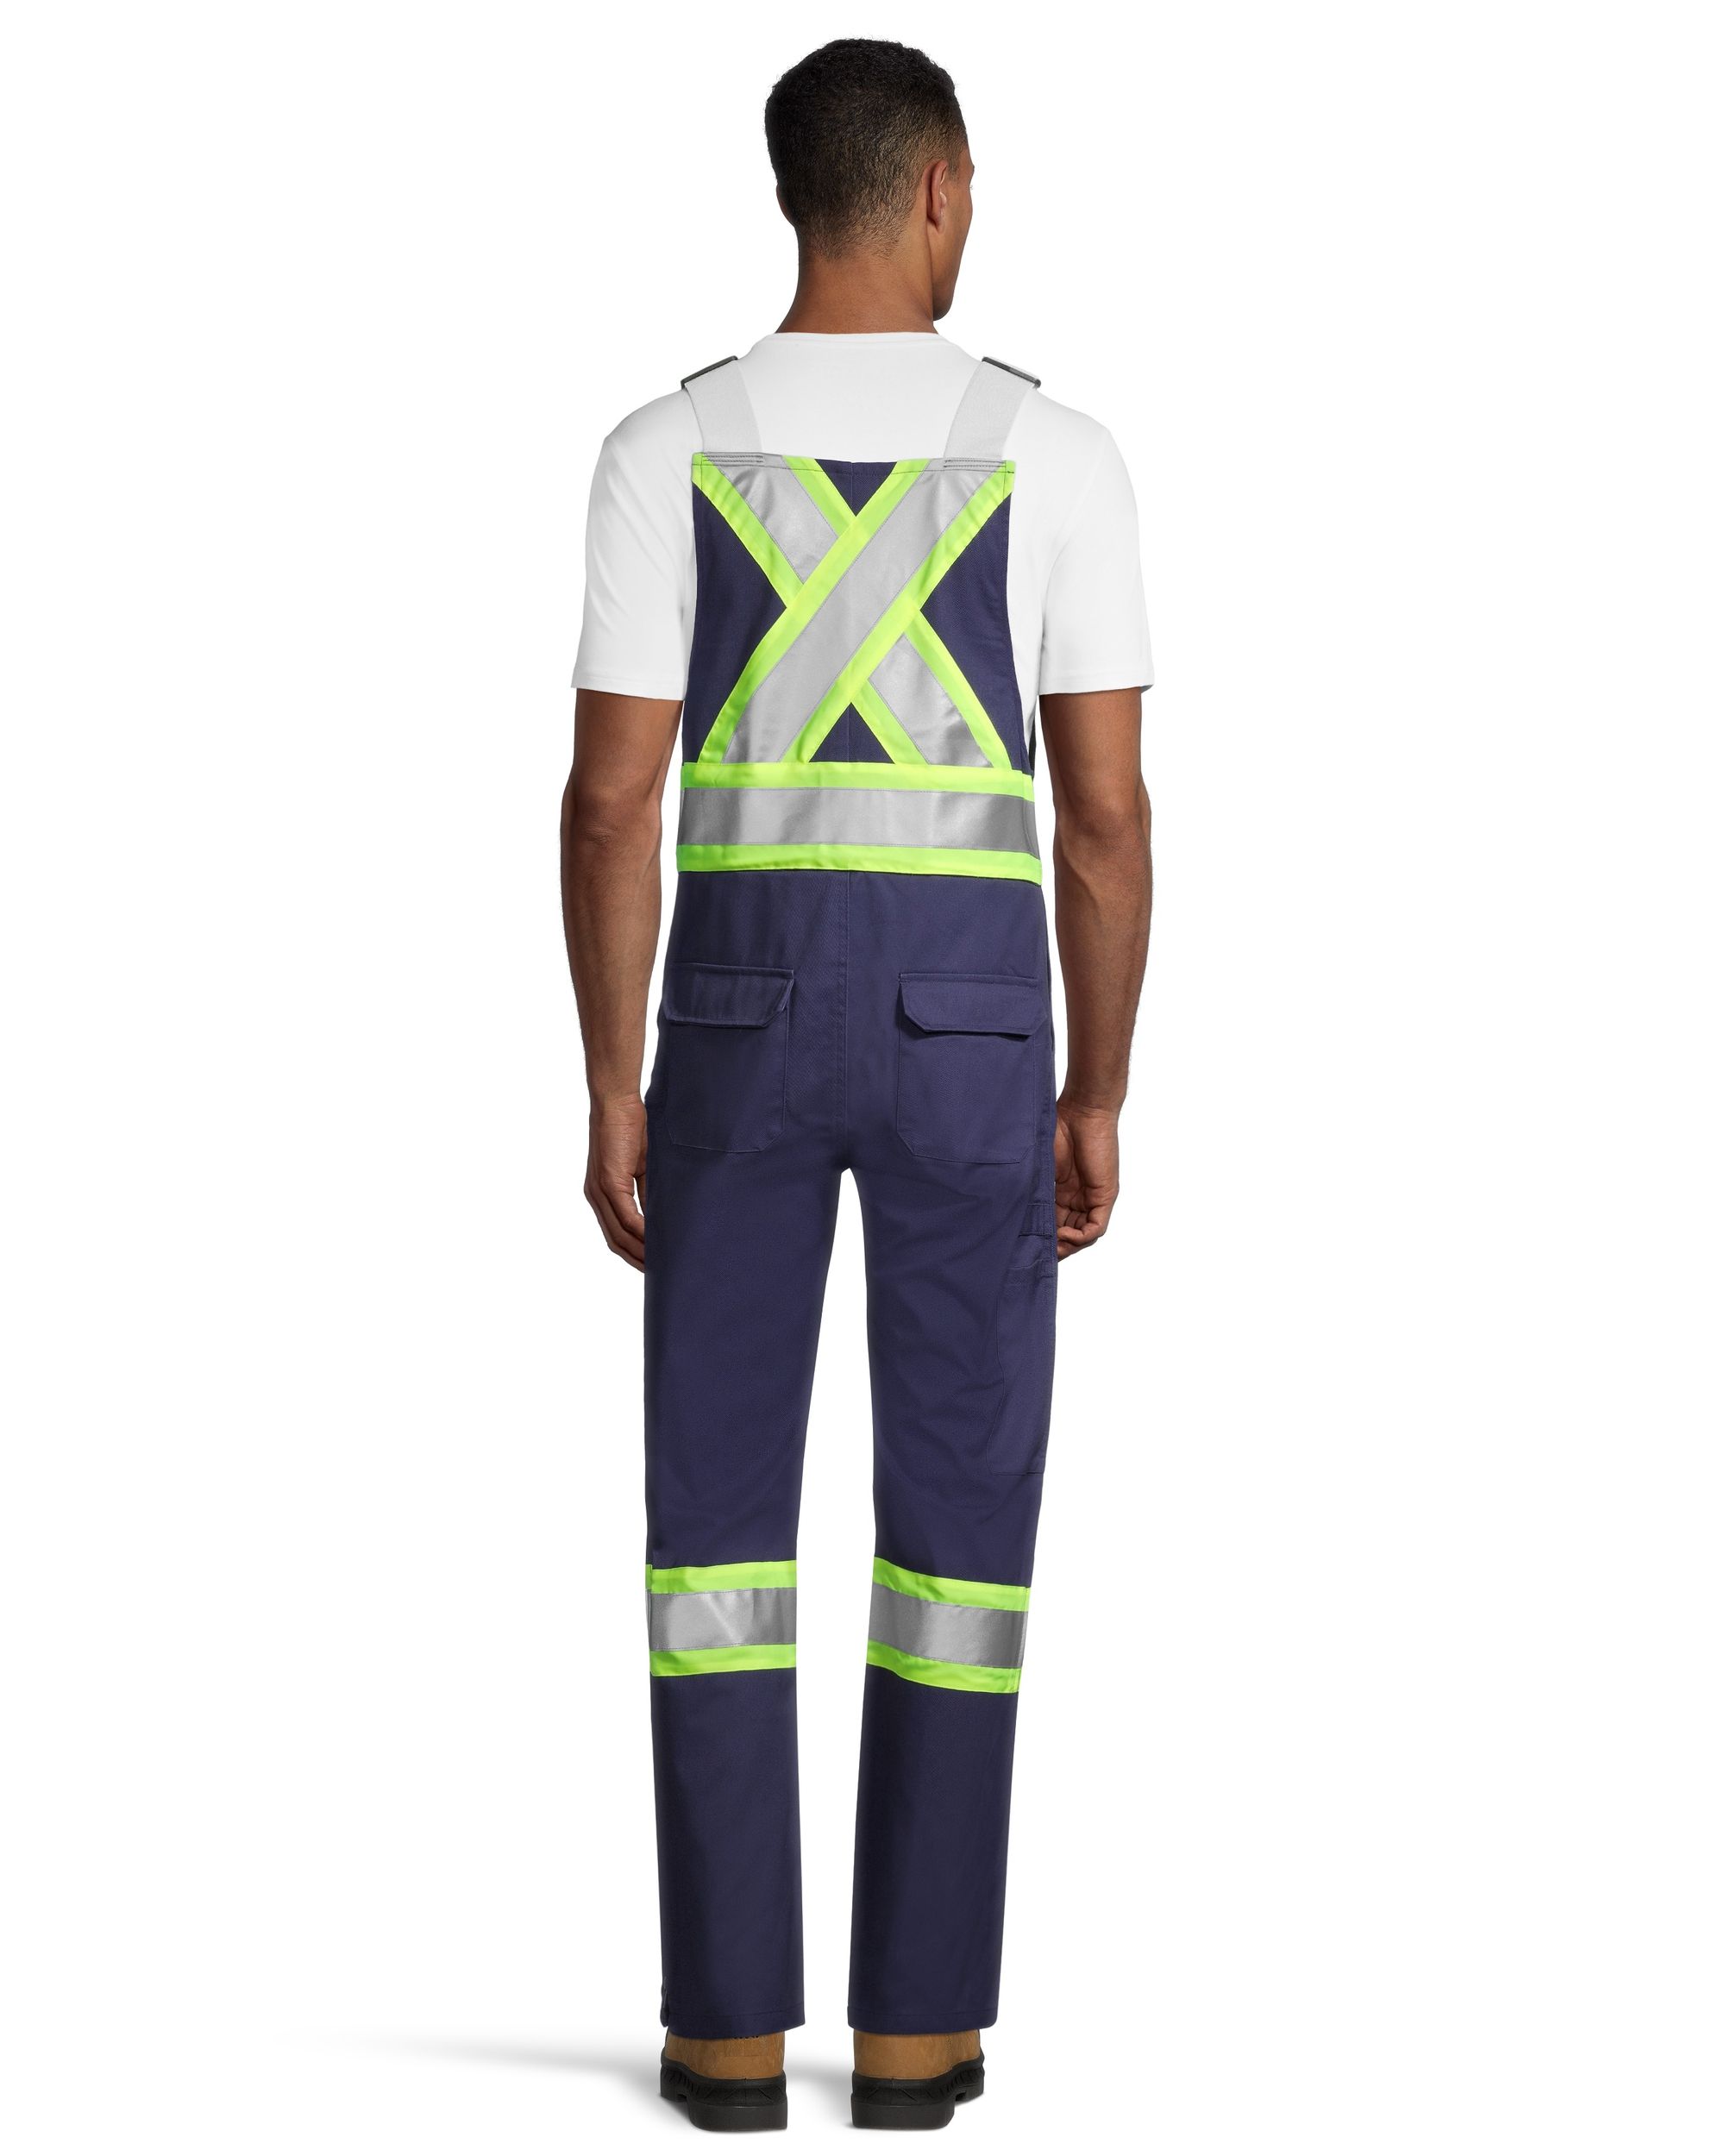 Viking Men's Overall with 4 Inch Reflective Tape